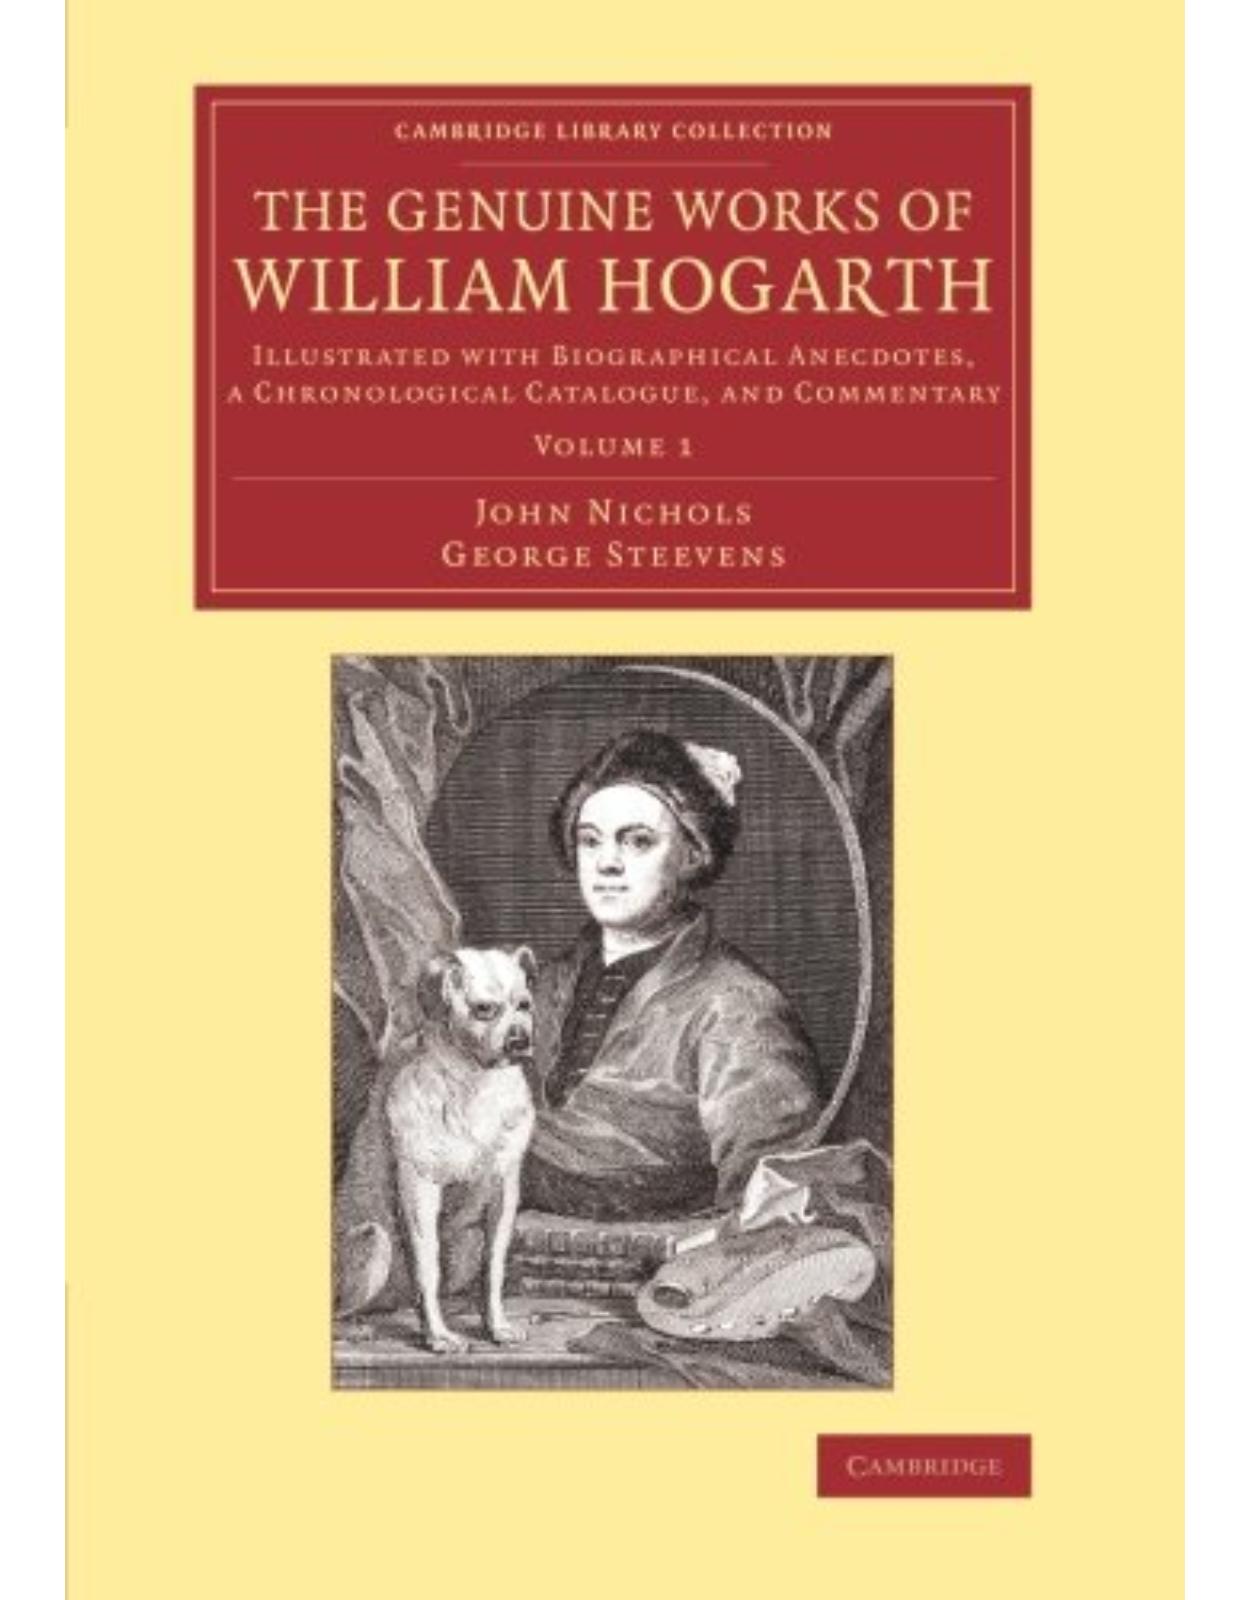 The Genuine Works of William Hogarth 3 Volume Set: Illustrated with Biographical Anecdotes, a Chronological Catalogue, and Commentary (Cambridge Library Collection - Art and Architecture) Paperback